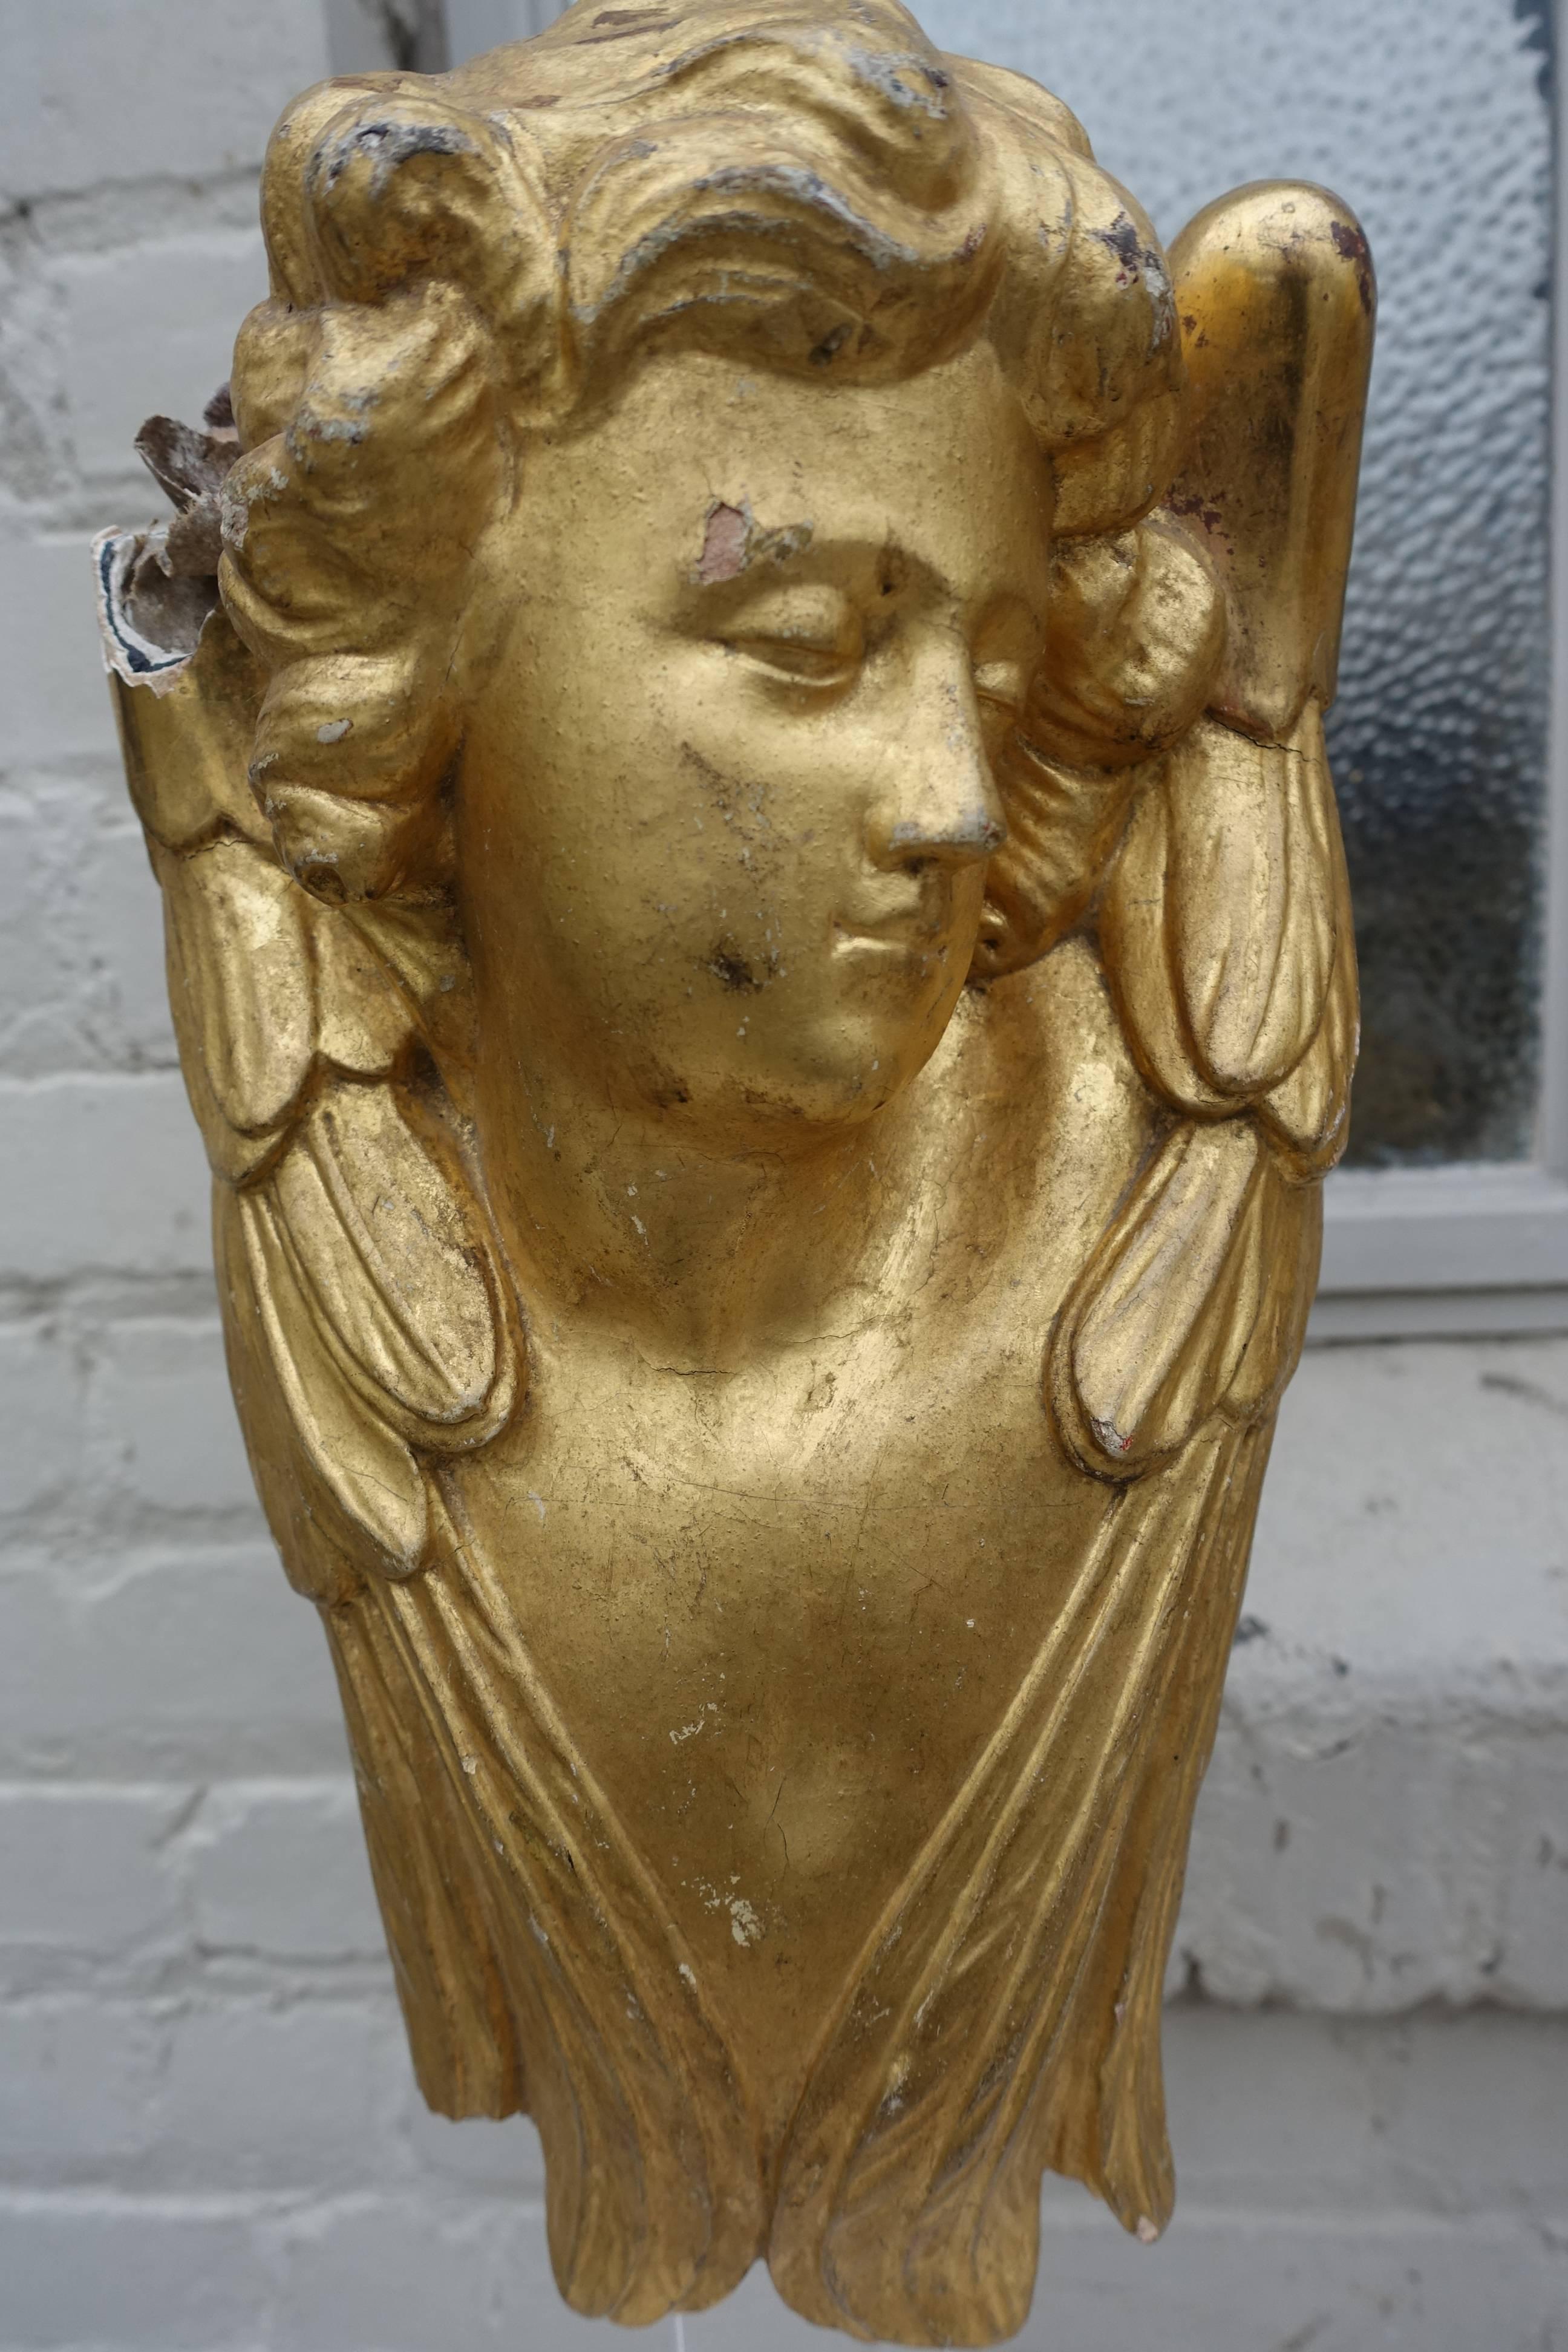 Pair of 19th century gold leaf cherubs on Lucite bases. They seem to be layers of thick gold over gesso and paper. Beautiful, serene faces.